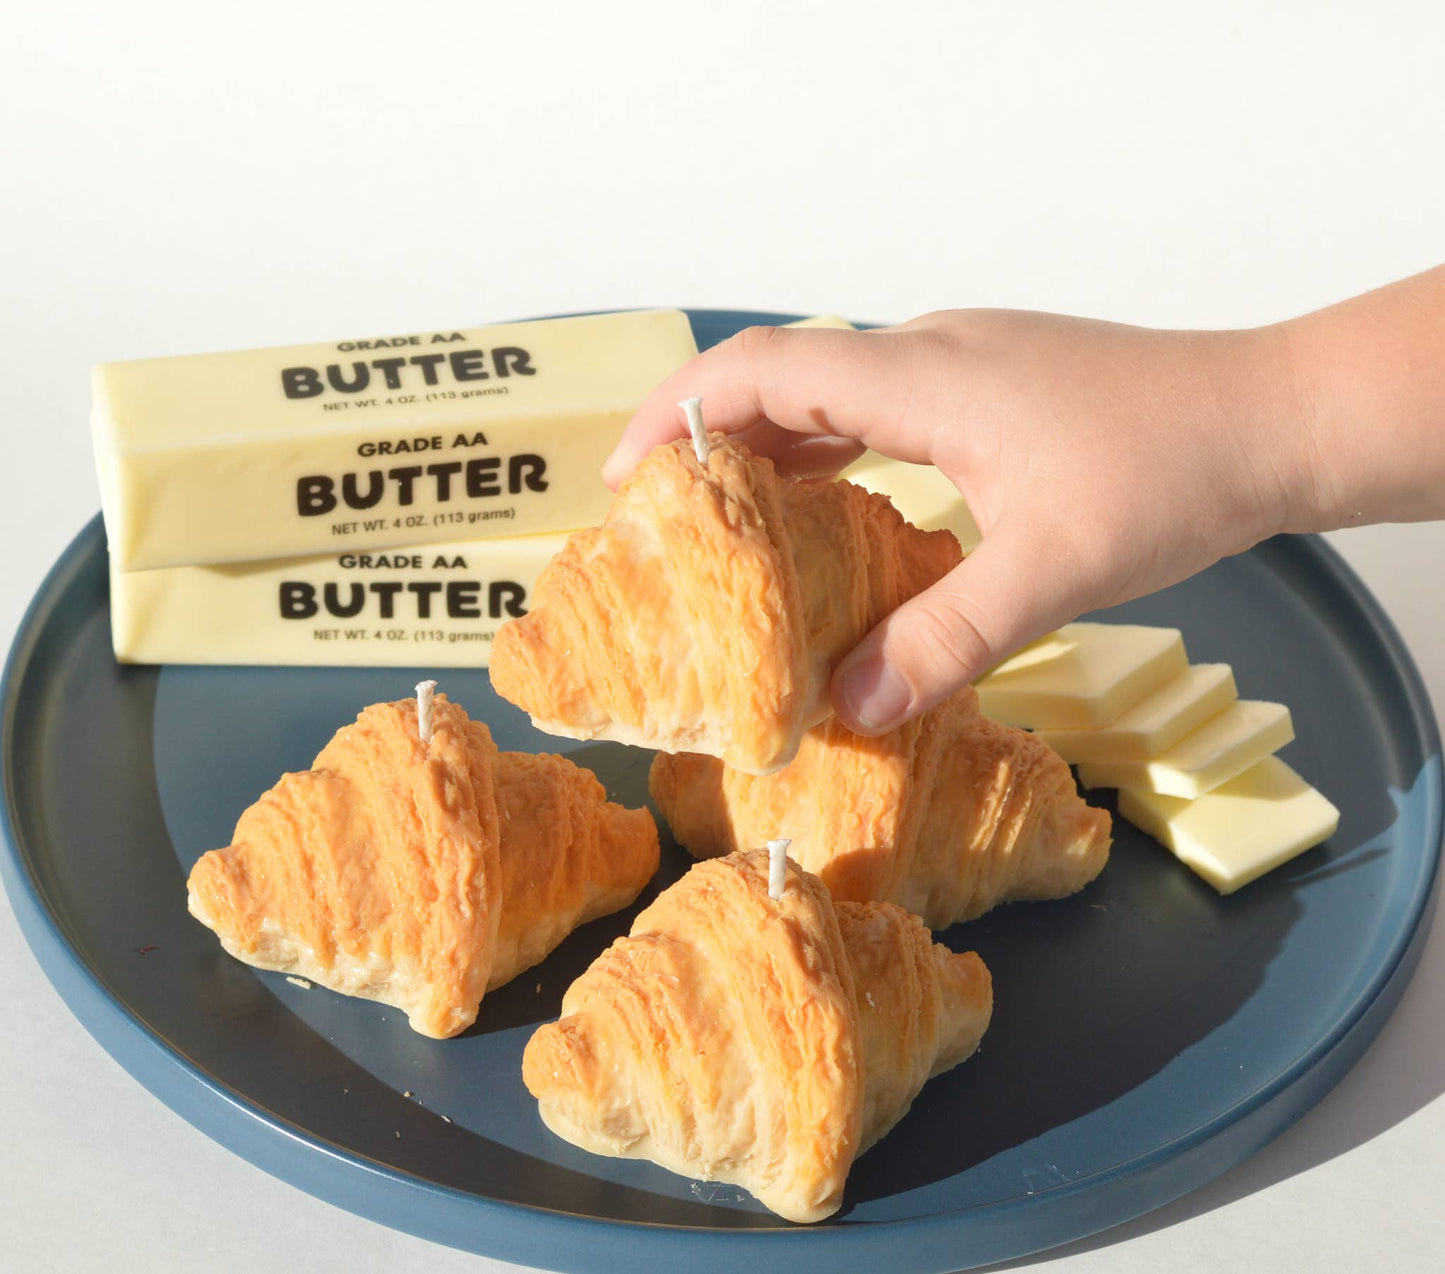 Hand reaching for a pile of four croissant candles on a plate next to slabs of butter.